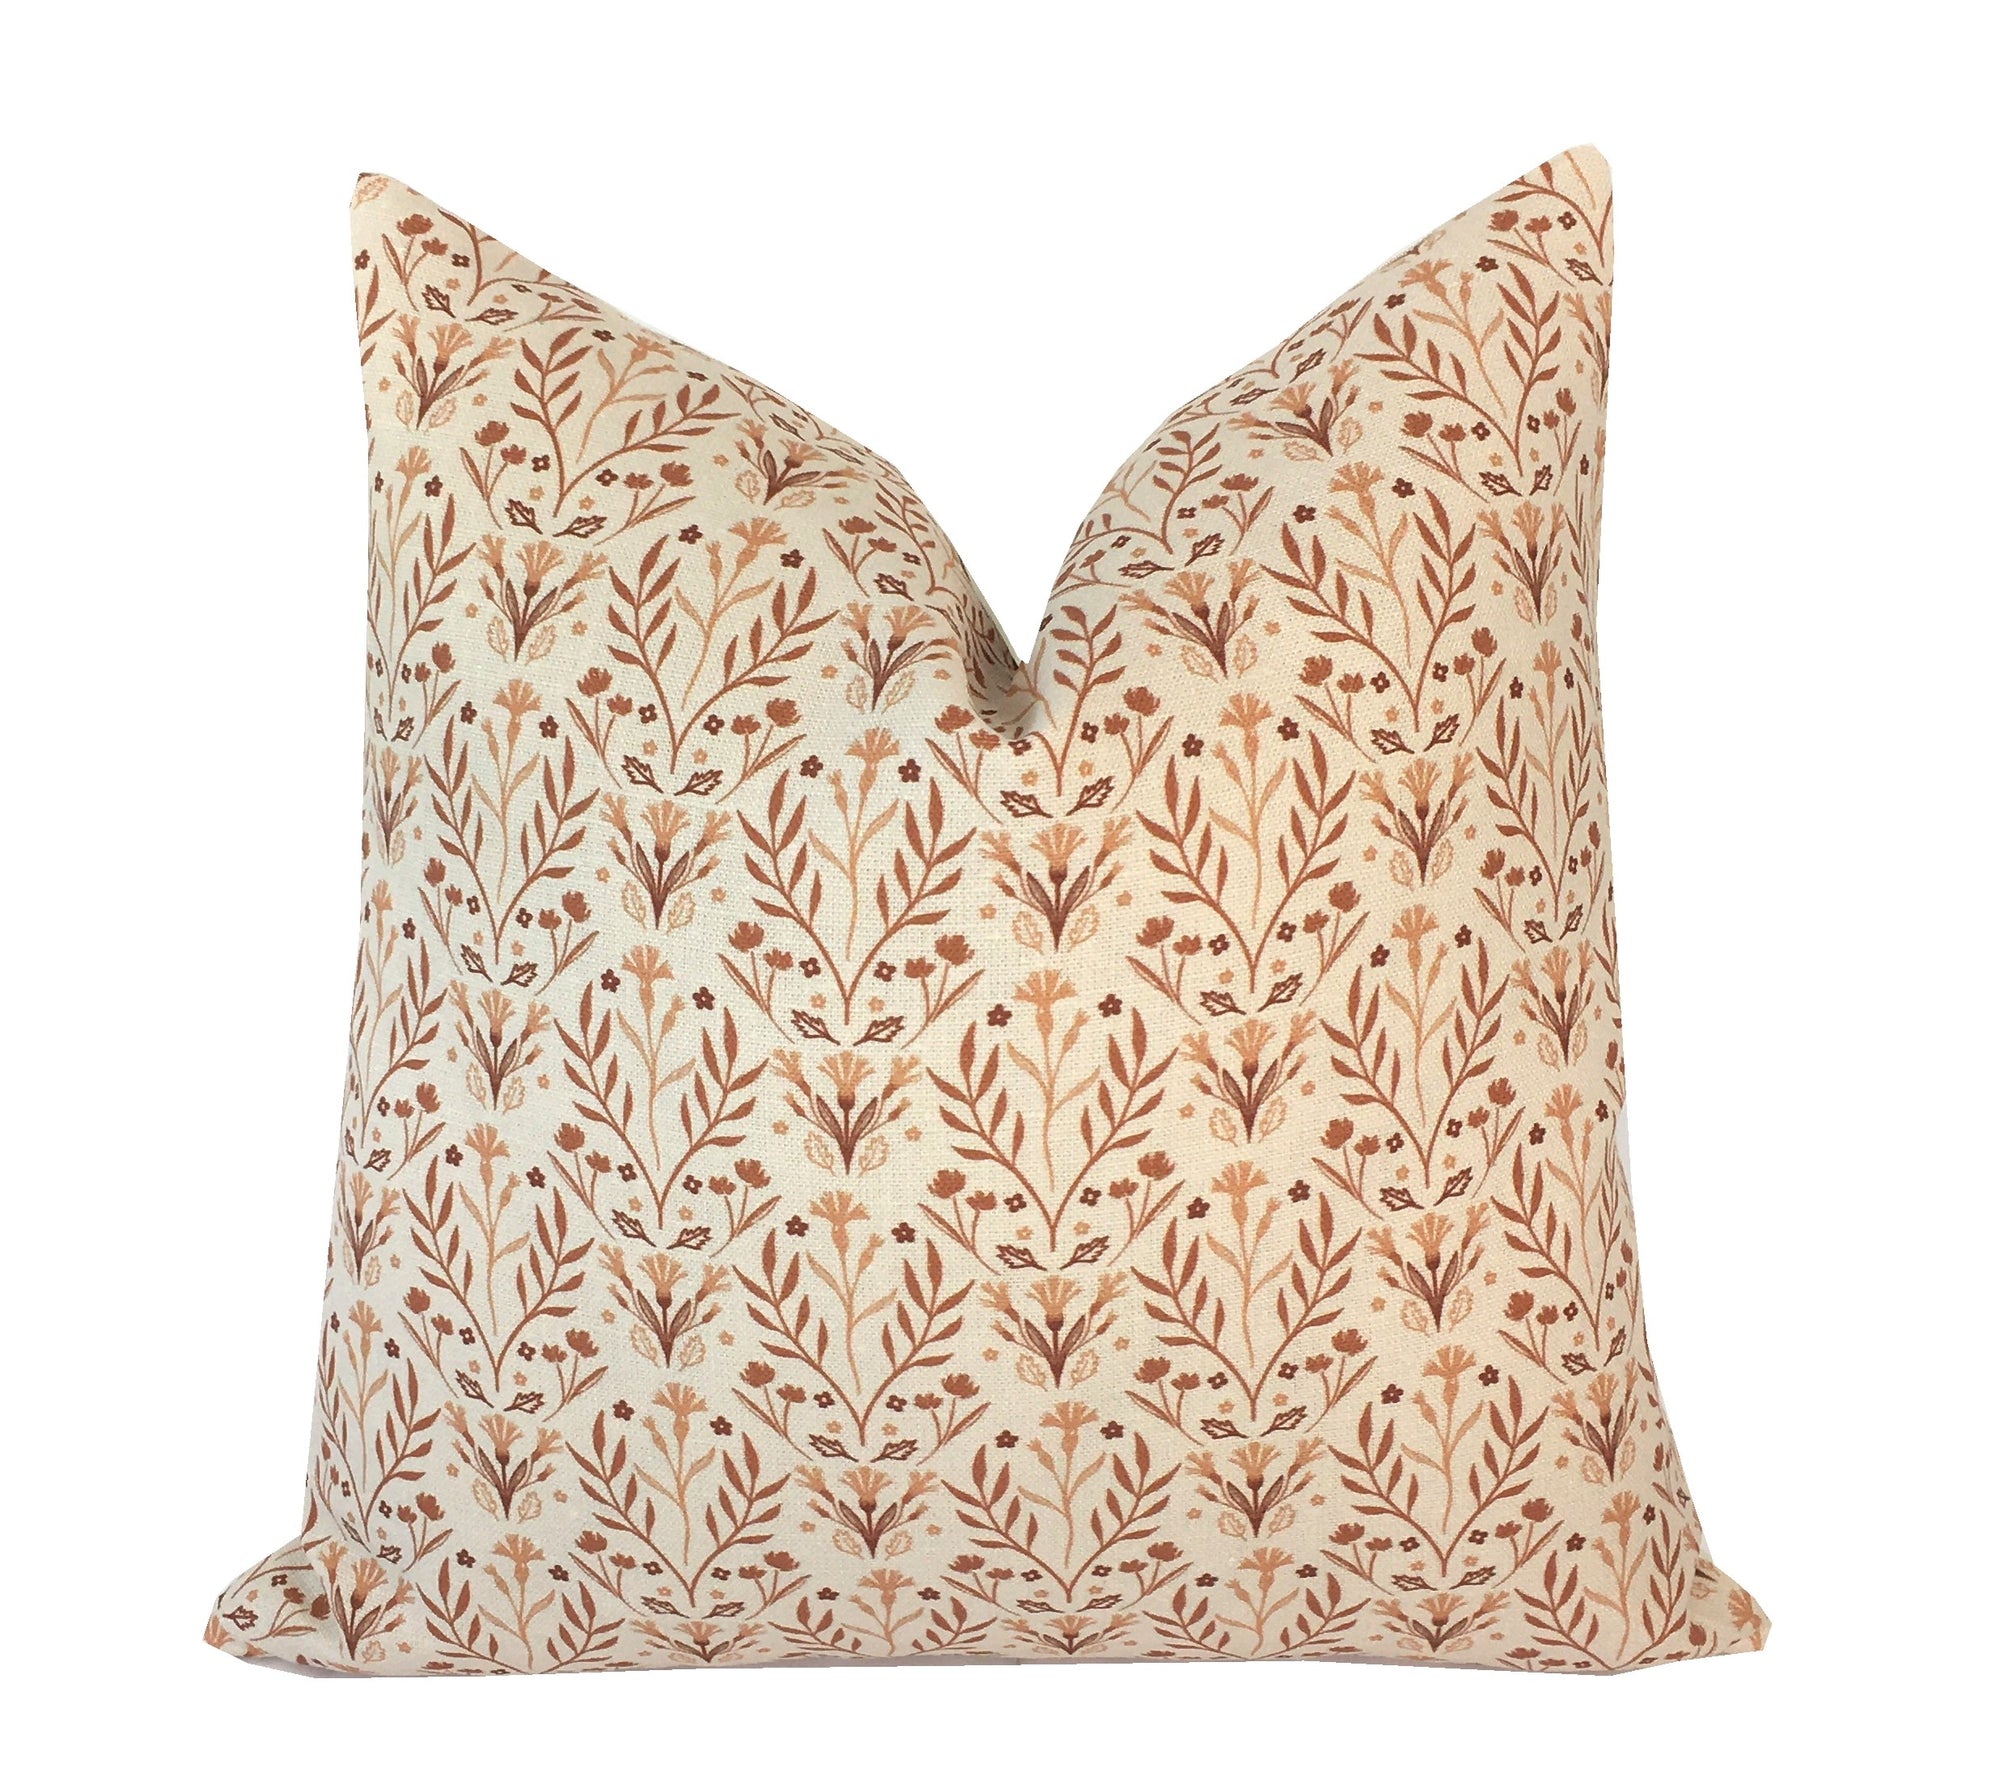 Wilderness Spice Pillow Cover | Rust Brown Tones | Earthy